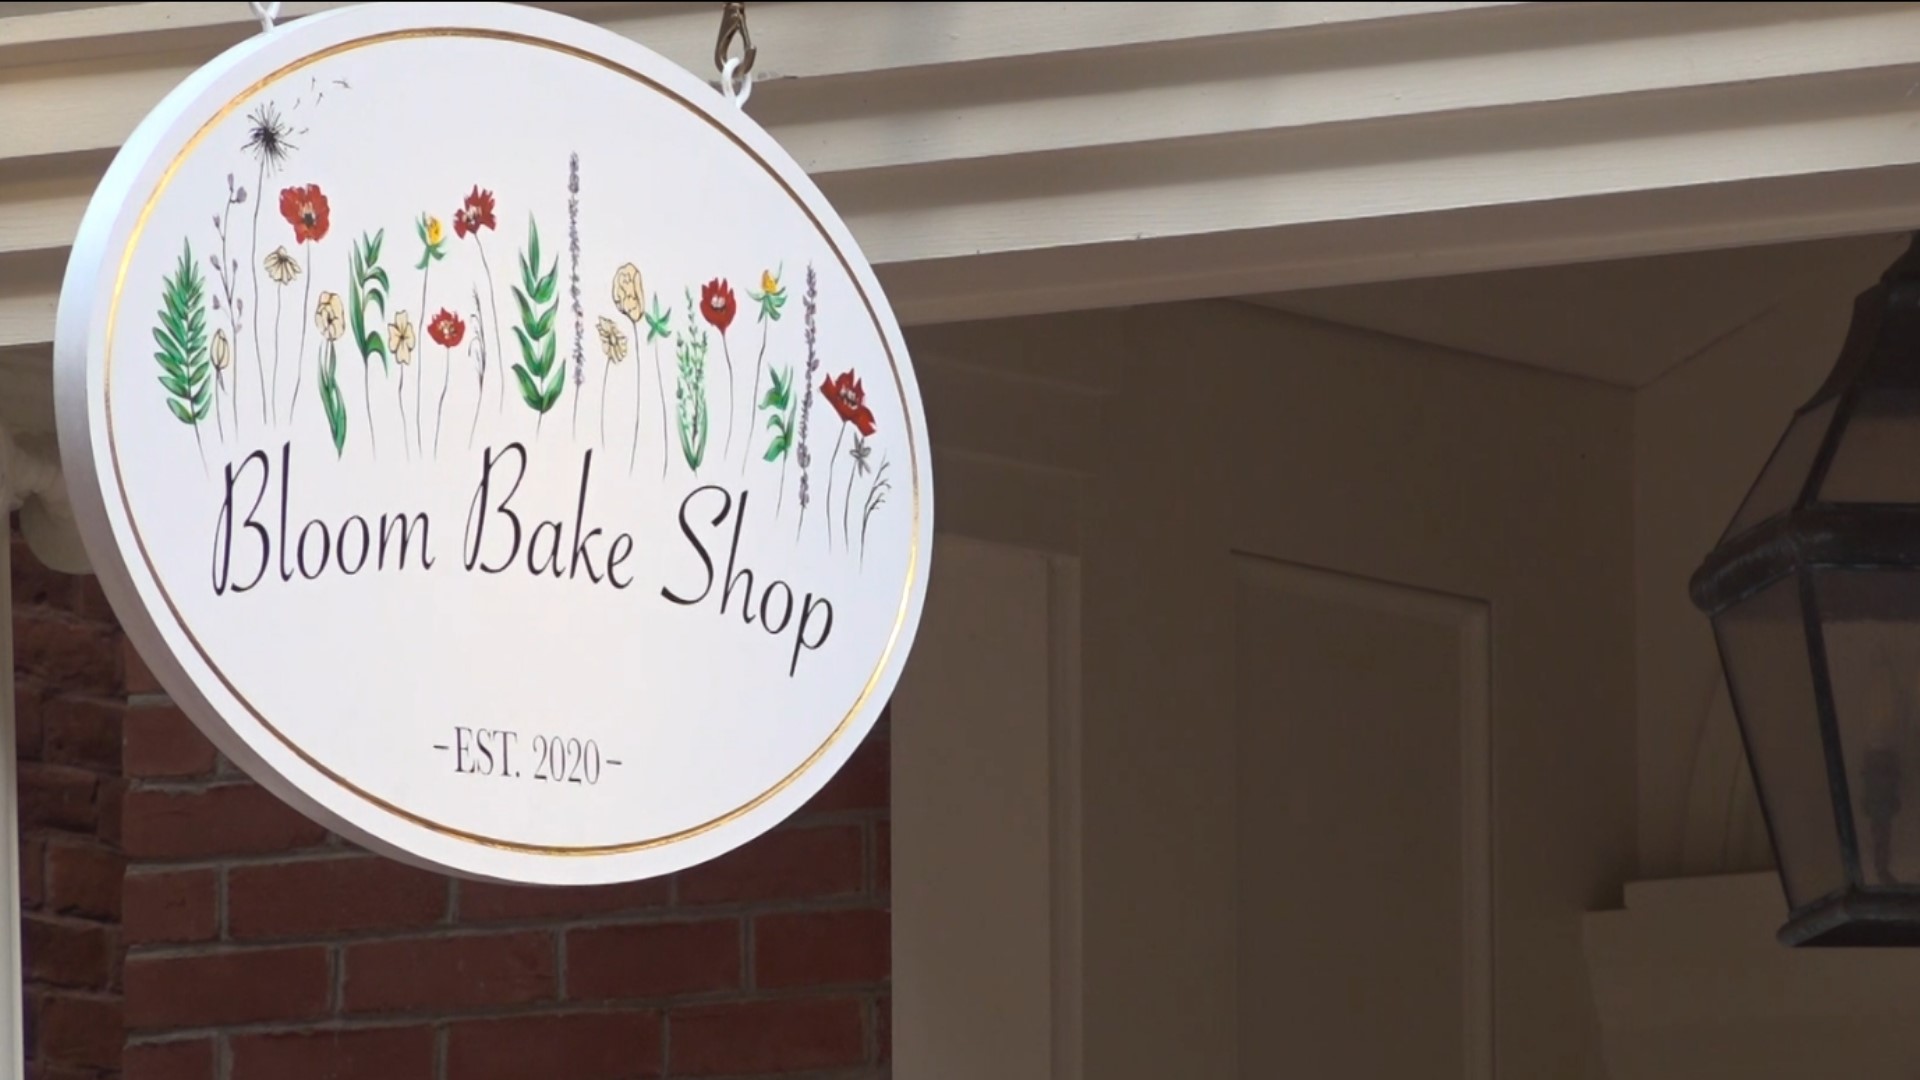 Owners Alex Pilon and Monica Beaudoin started Bloom Bake Shop in September 2020. They said seeing its growth really is a dream come true.